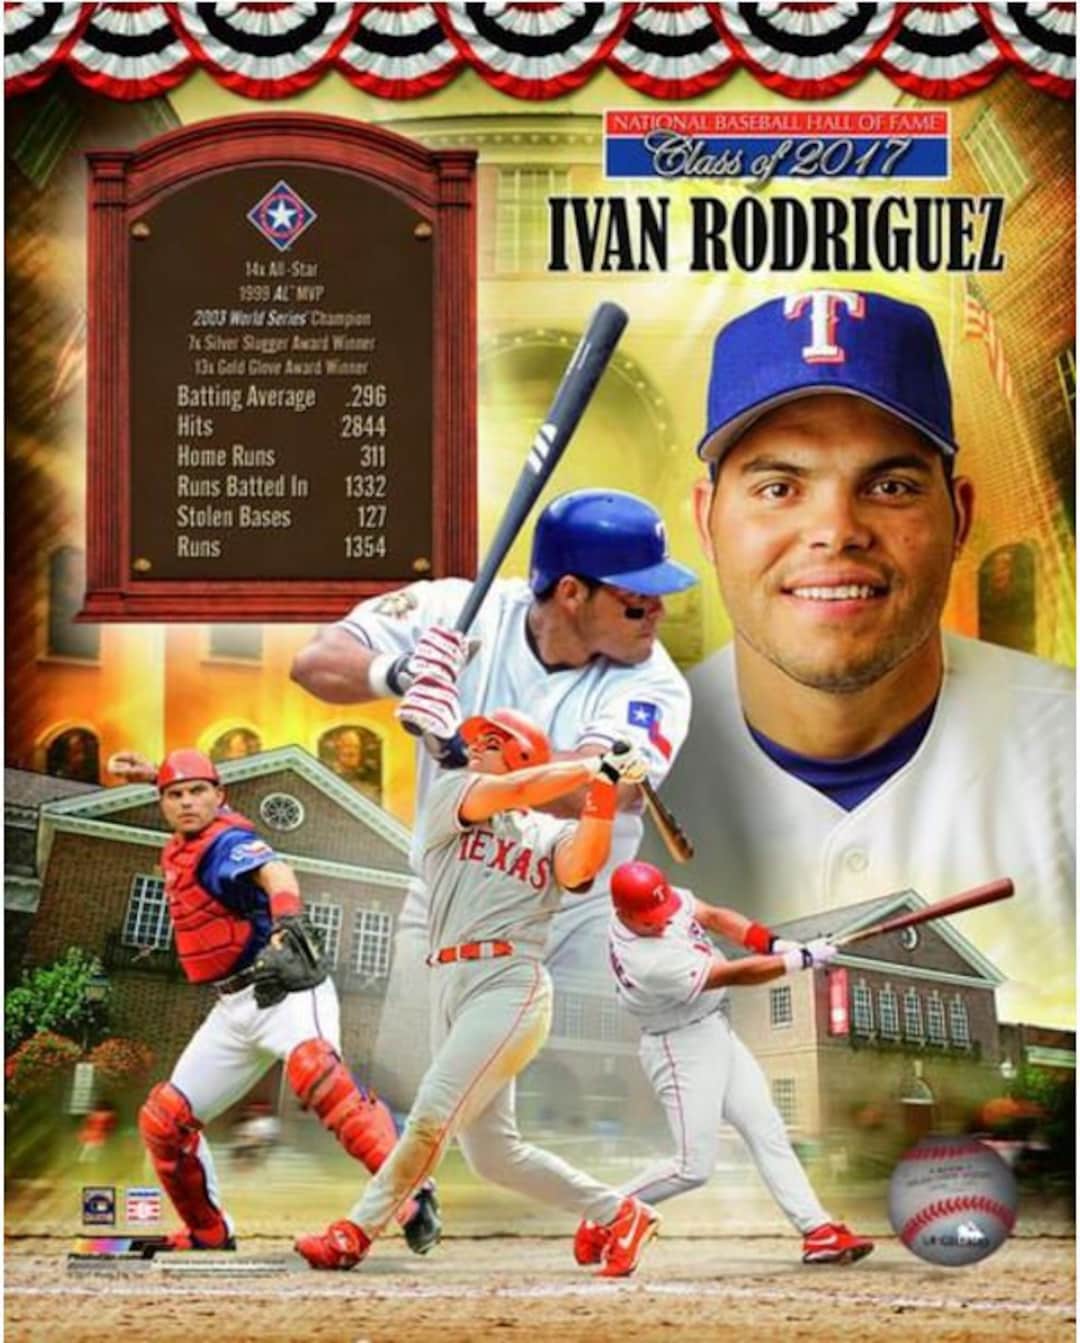 Ivan Rodriguez Texas Rangers 2017 MLB Hall of Fame Induction 